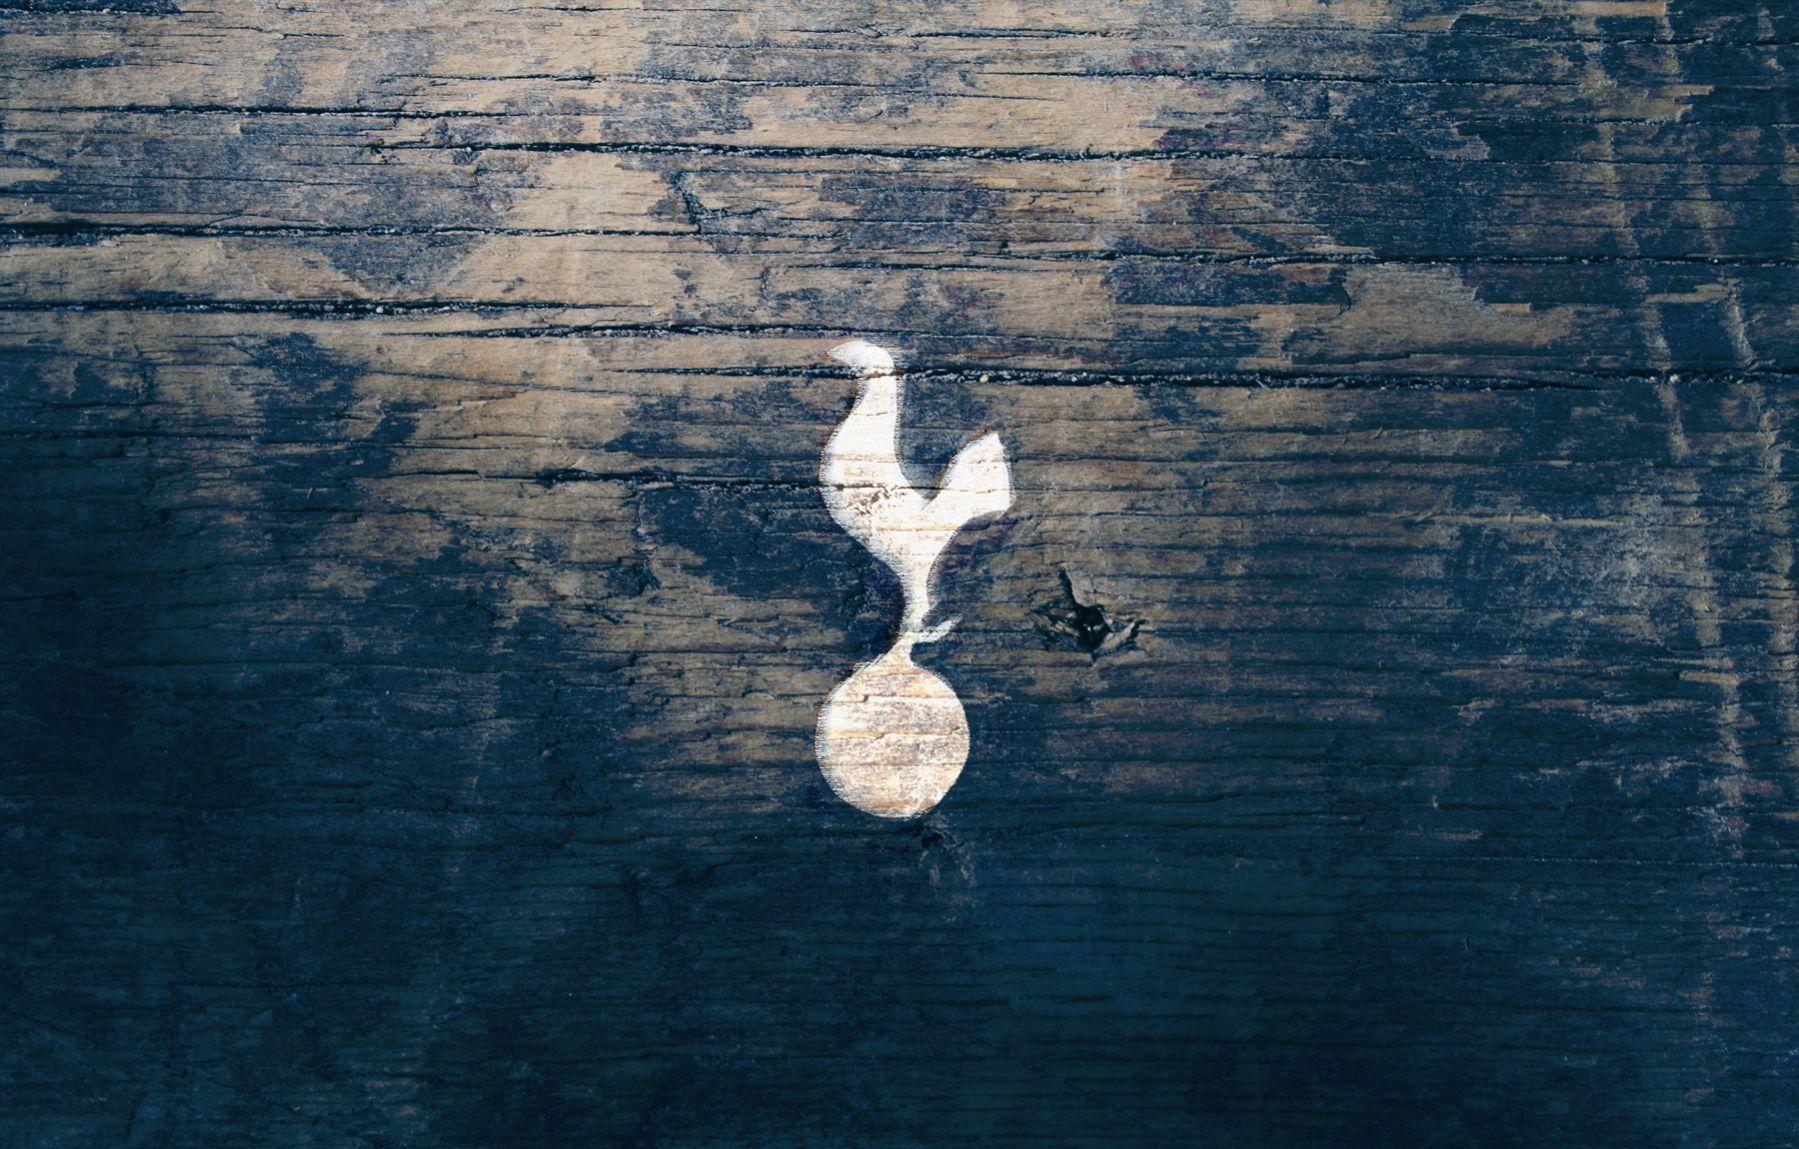 Spurs Wallpaper. The Fighting Cock Hotspur